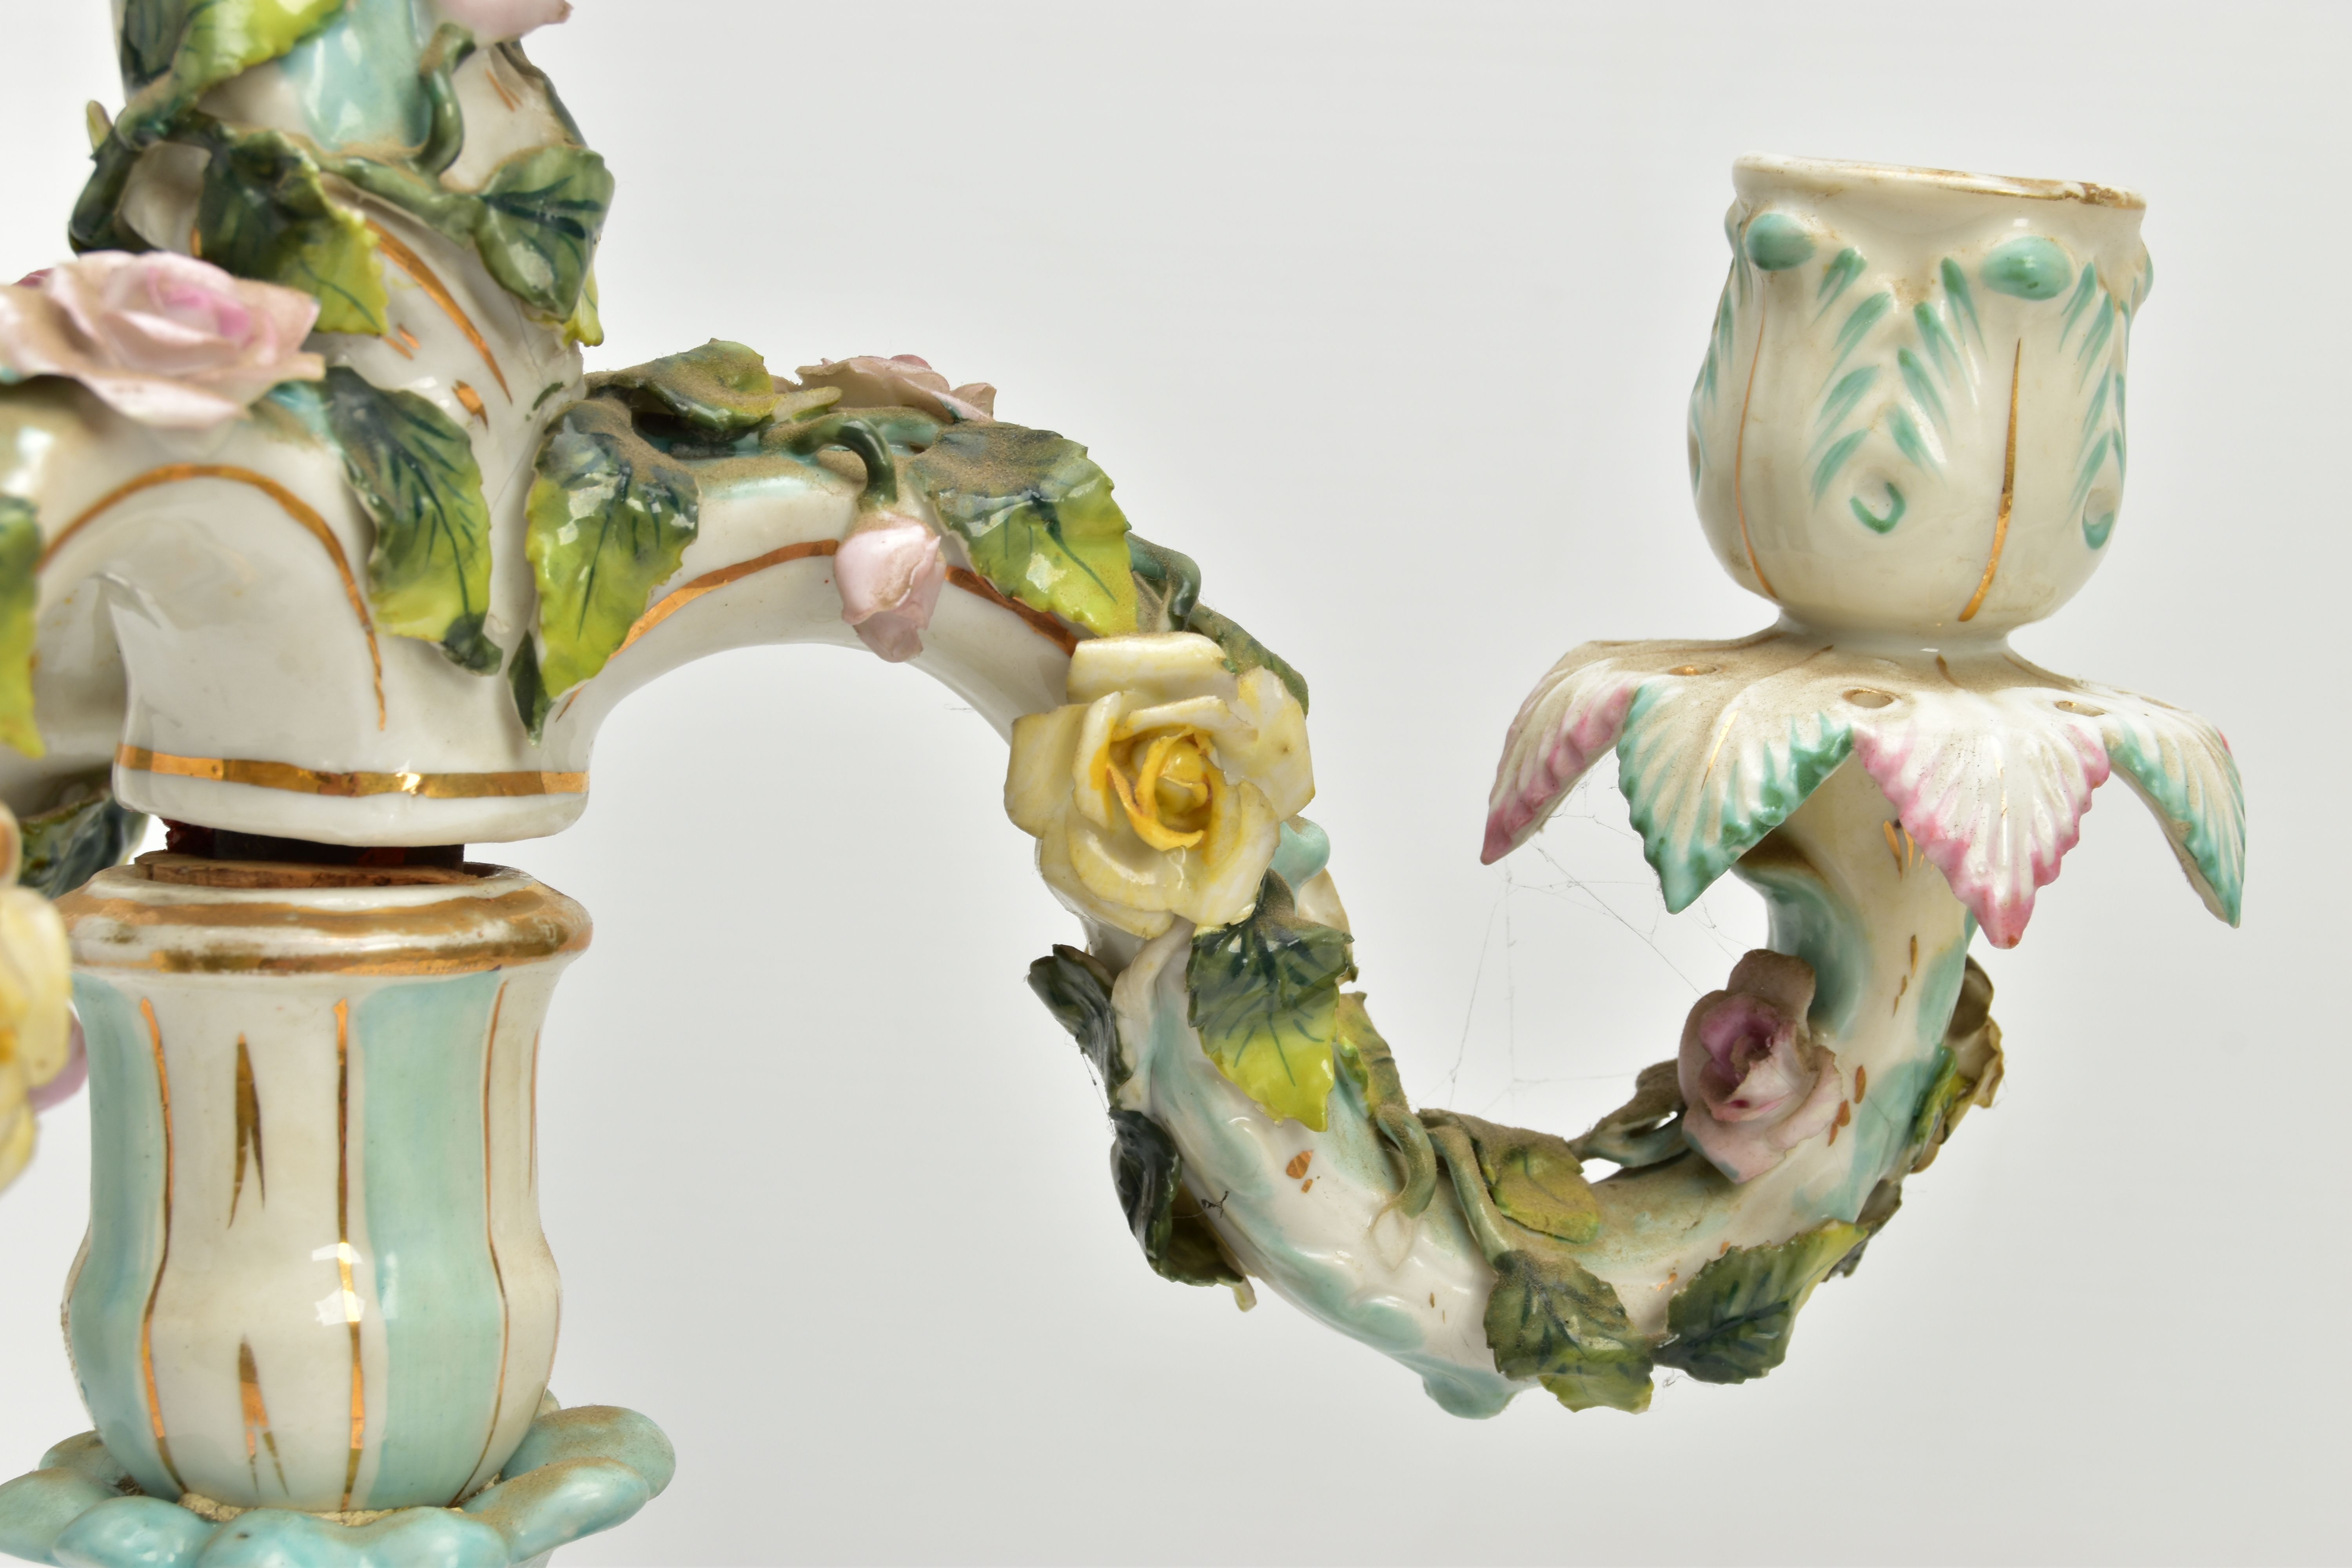 A PAIR OF LATE 19TH / EARLY 20TH CENTURY PLAUE PORCELAIN FLORALLY ENCRUSTED FIGURAL CANDELABRA, each - Image 13 of 23